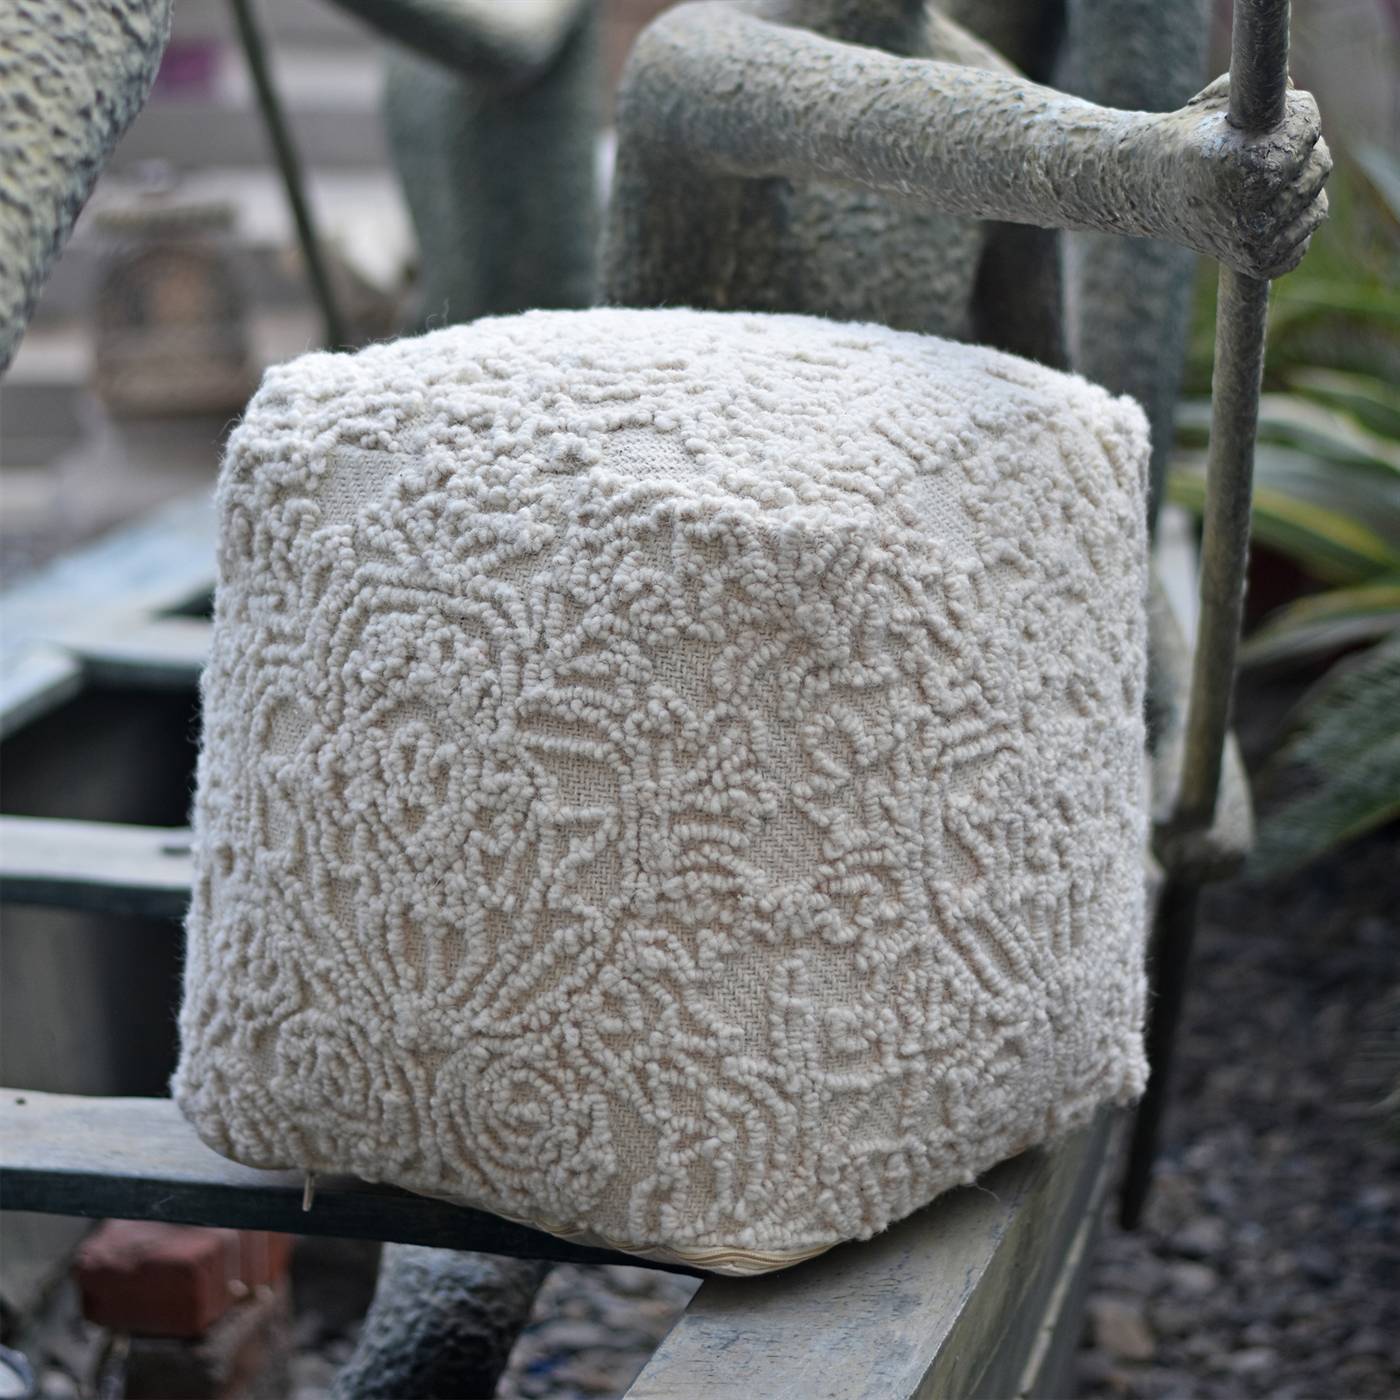 Natela Pouf, 40x40x40 cm, Natural White, Wool, Hand Tufted, Handtufted, All Loop